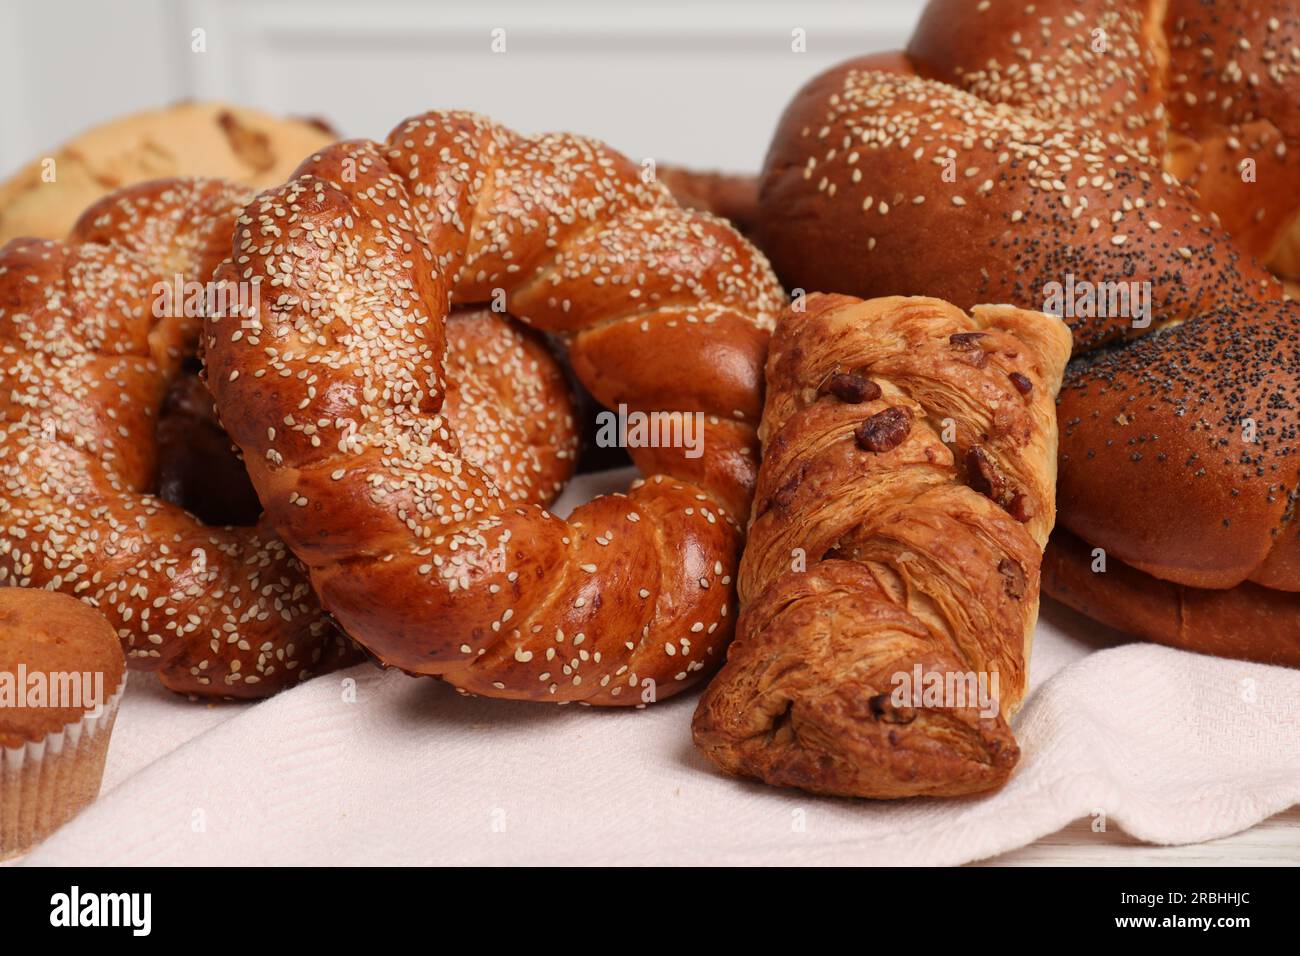 Different tasty freshly baked pastries on table, closeup Stock Photo